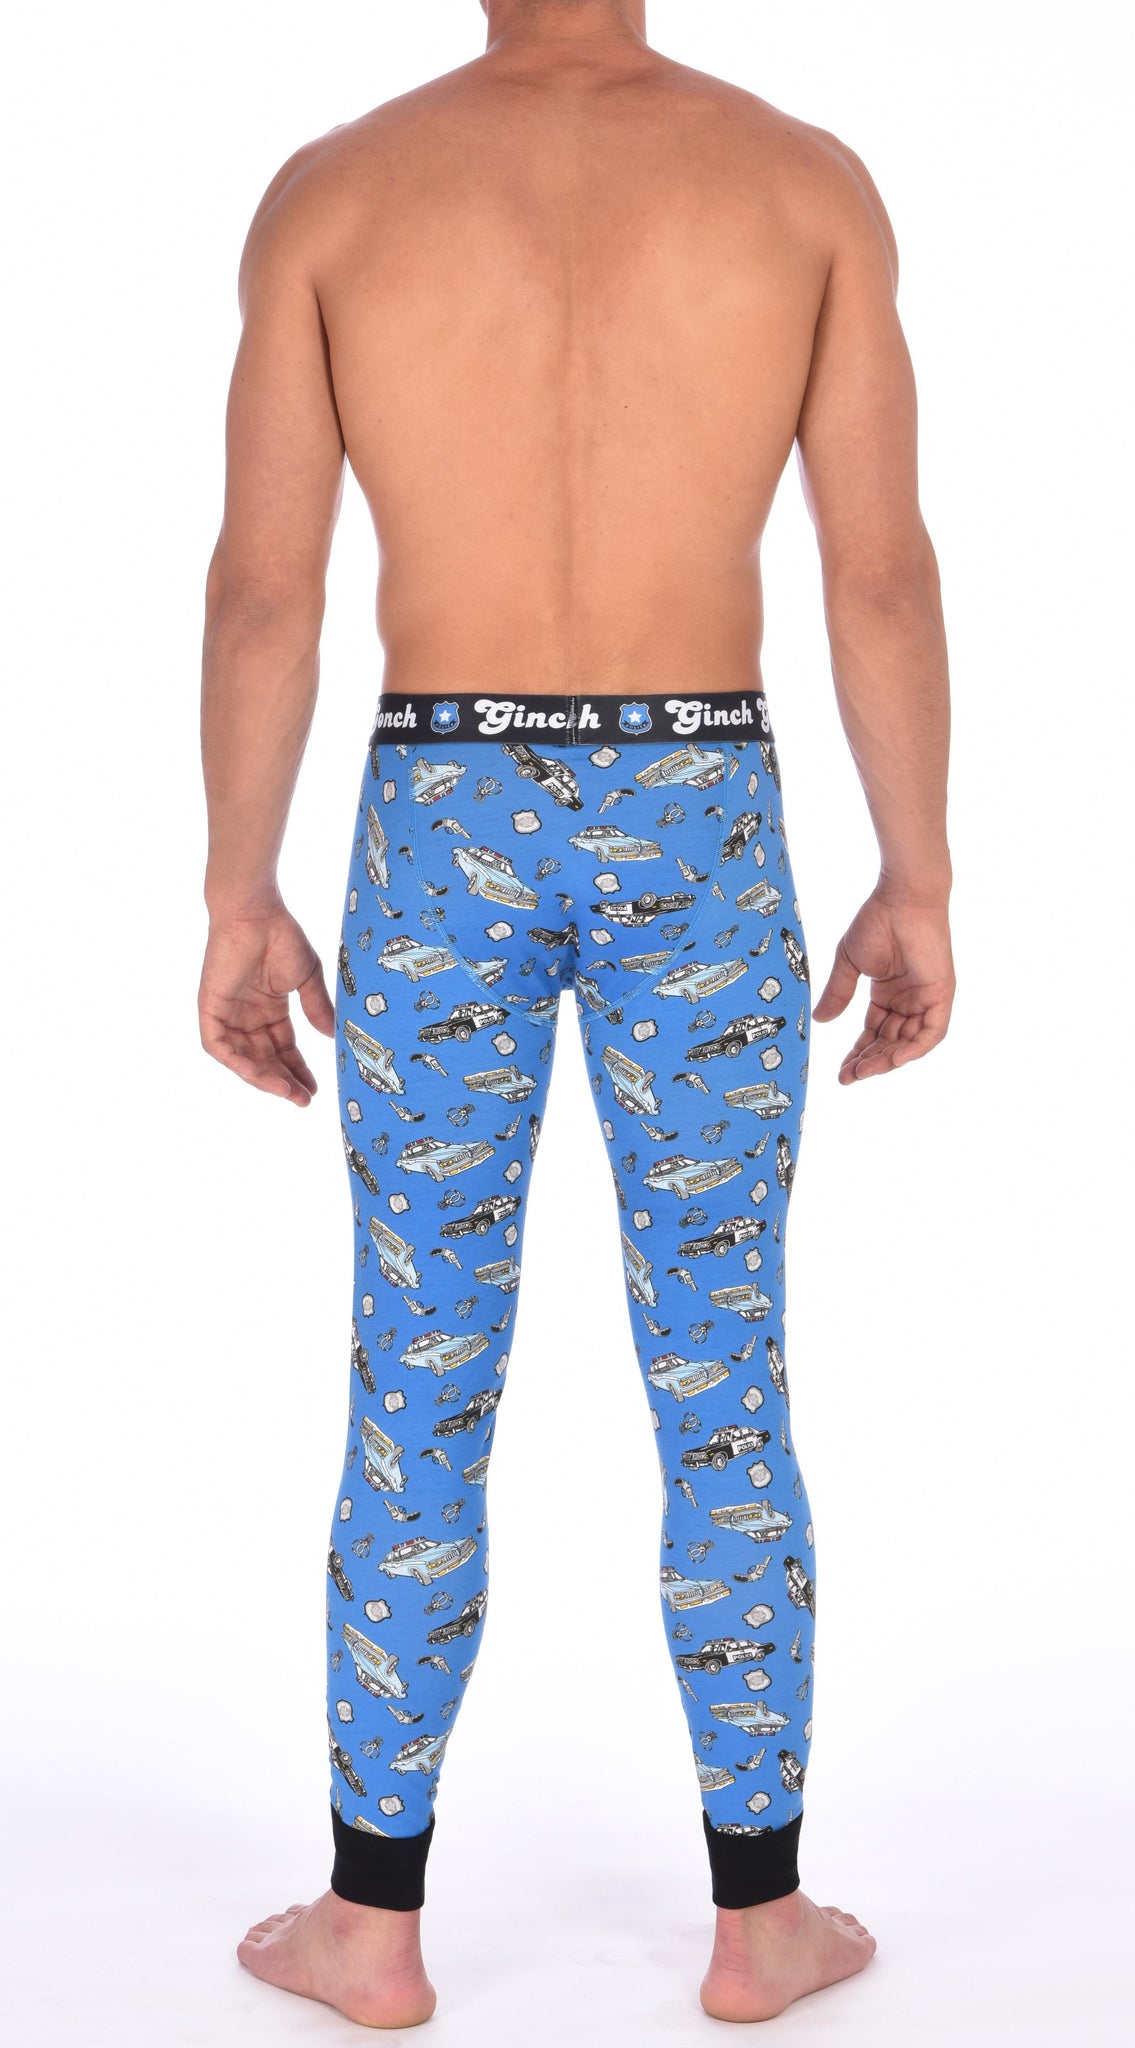 Ginch Gonch GG Patrol long john legging men's long underwear y front blue fabric with cop cars, badges, hand cuffs, and guns. Black trim and black printed waistband back